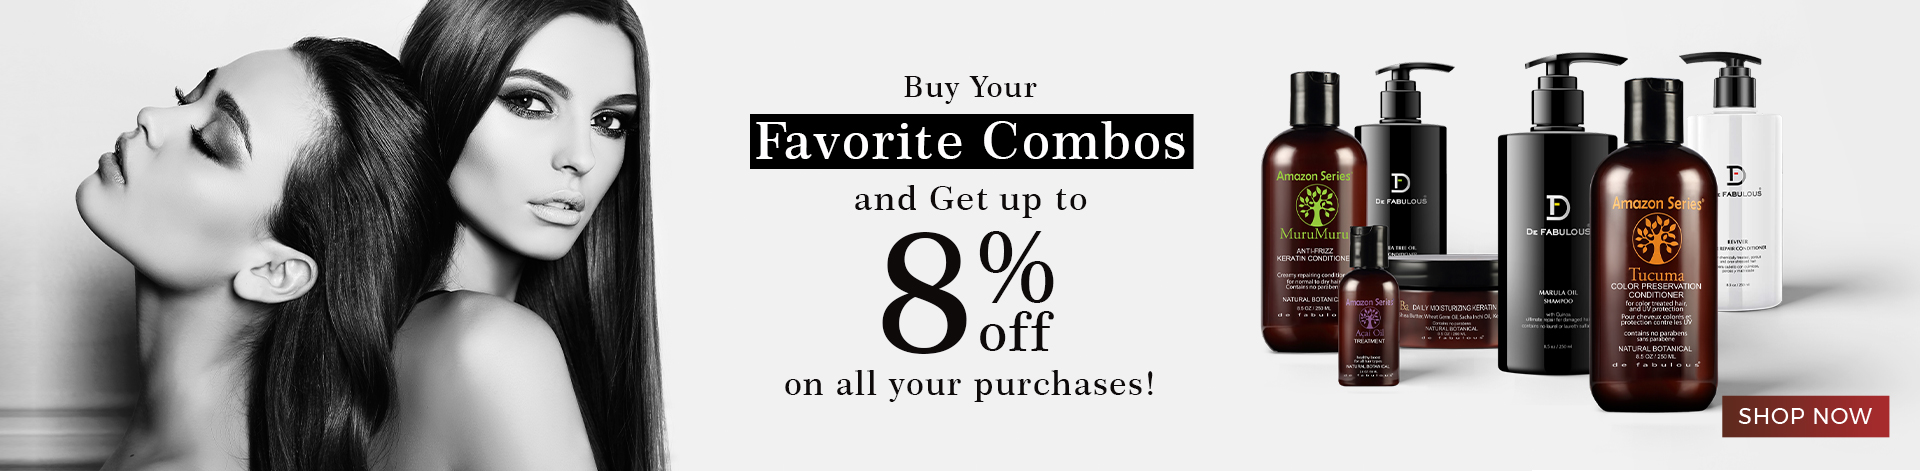 "De Fabulous Combo Products: Get 8% Off on Perfectly Matched Hair Care Products for Ultimate Hair Care and Styling Solutions"